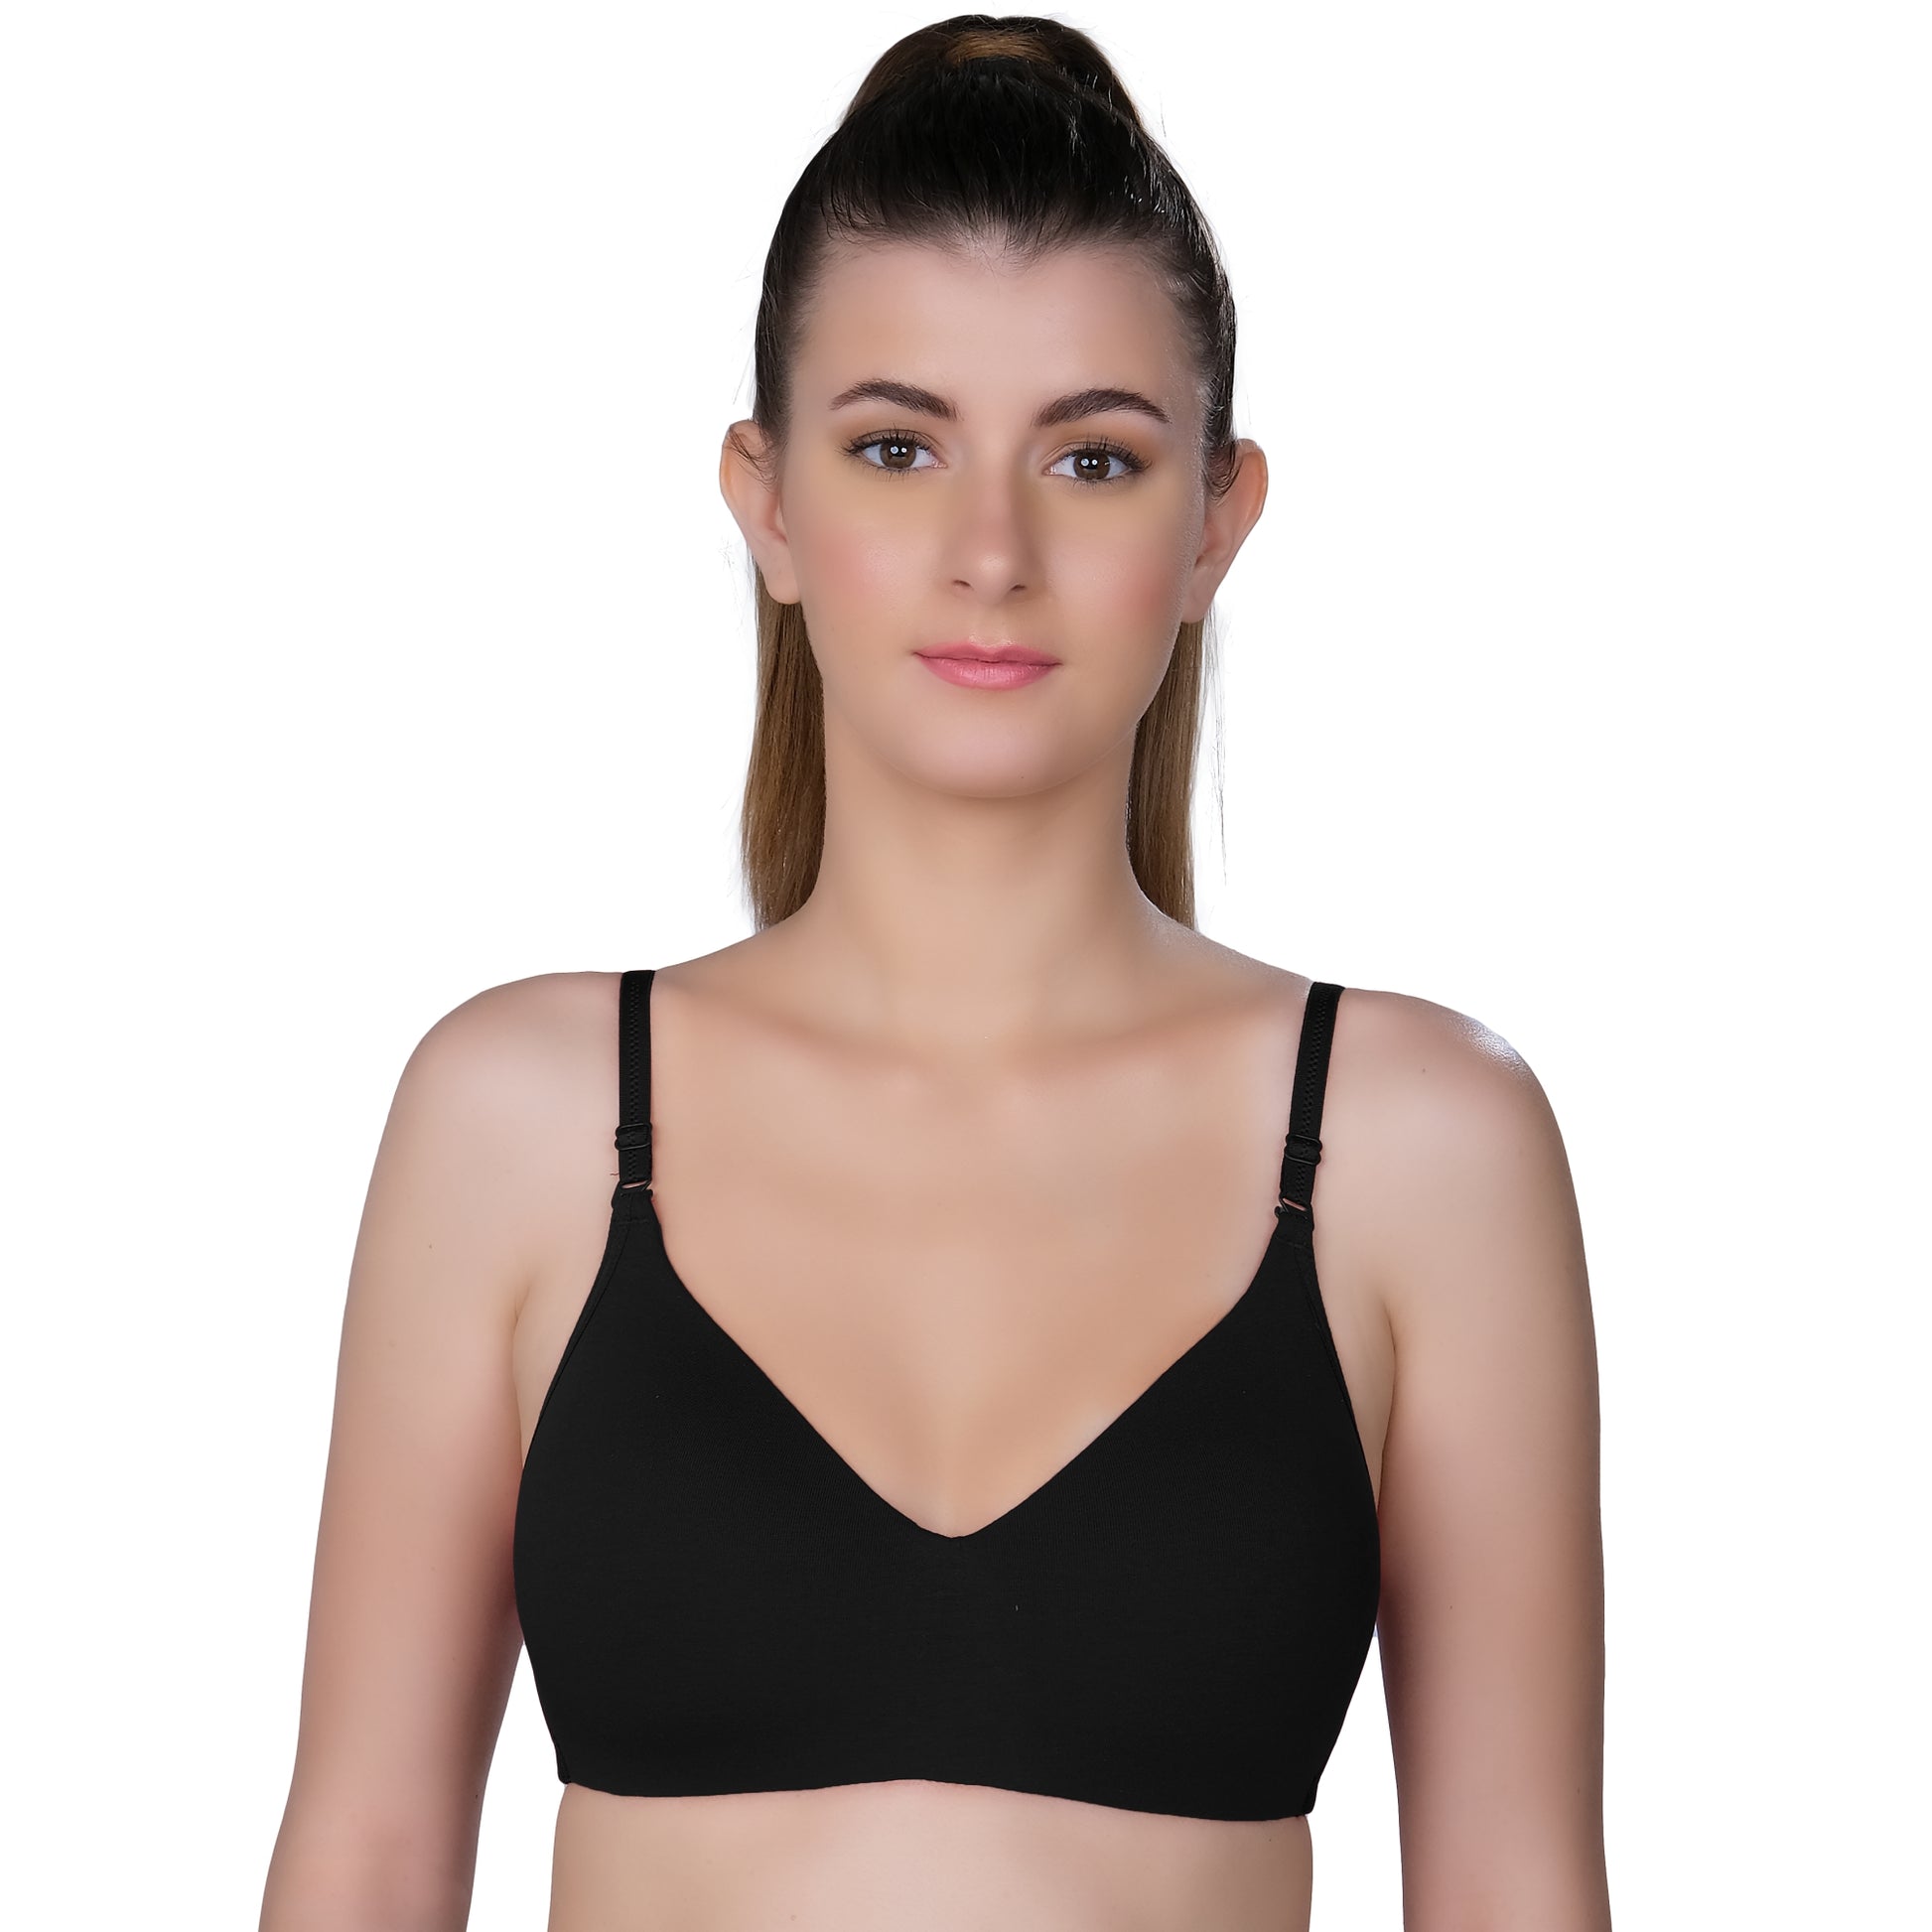 Trylo Intimates on X: No more bulky bra lines! RIZA BAE's sleek design  disappears under even the most fitted clothing. Product shown- RIZA BAE  #TryloIndia #TryloIntimates #RizaIntimates #RizabyTrylo #RIZABAEBra  #NoMoreBulkyLines #FashionMeetsFunction